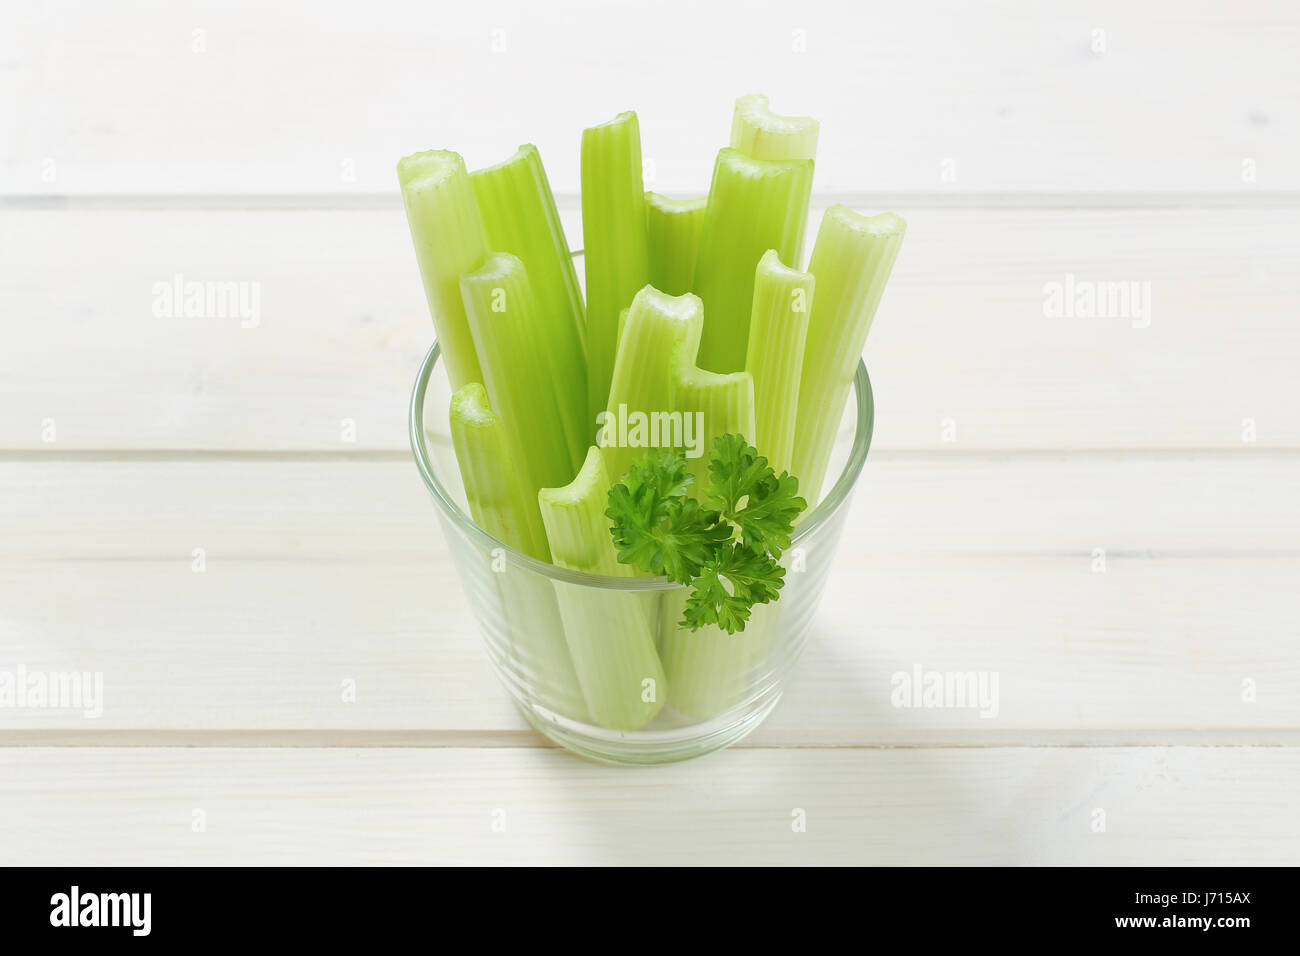 glass of green celery stems on white wooden background Stock Photo